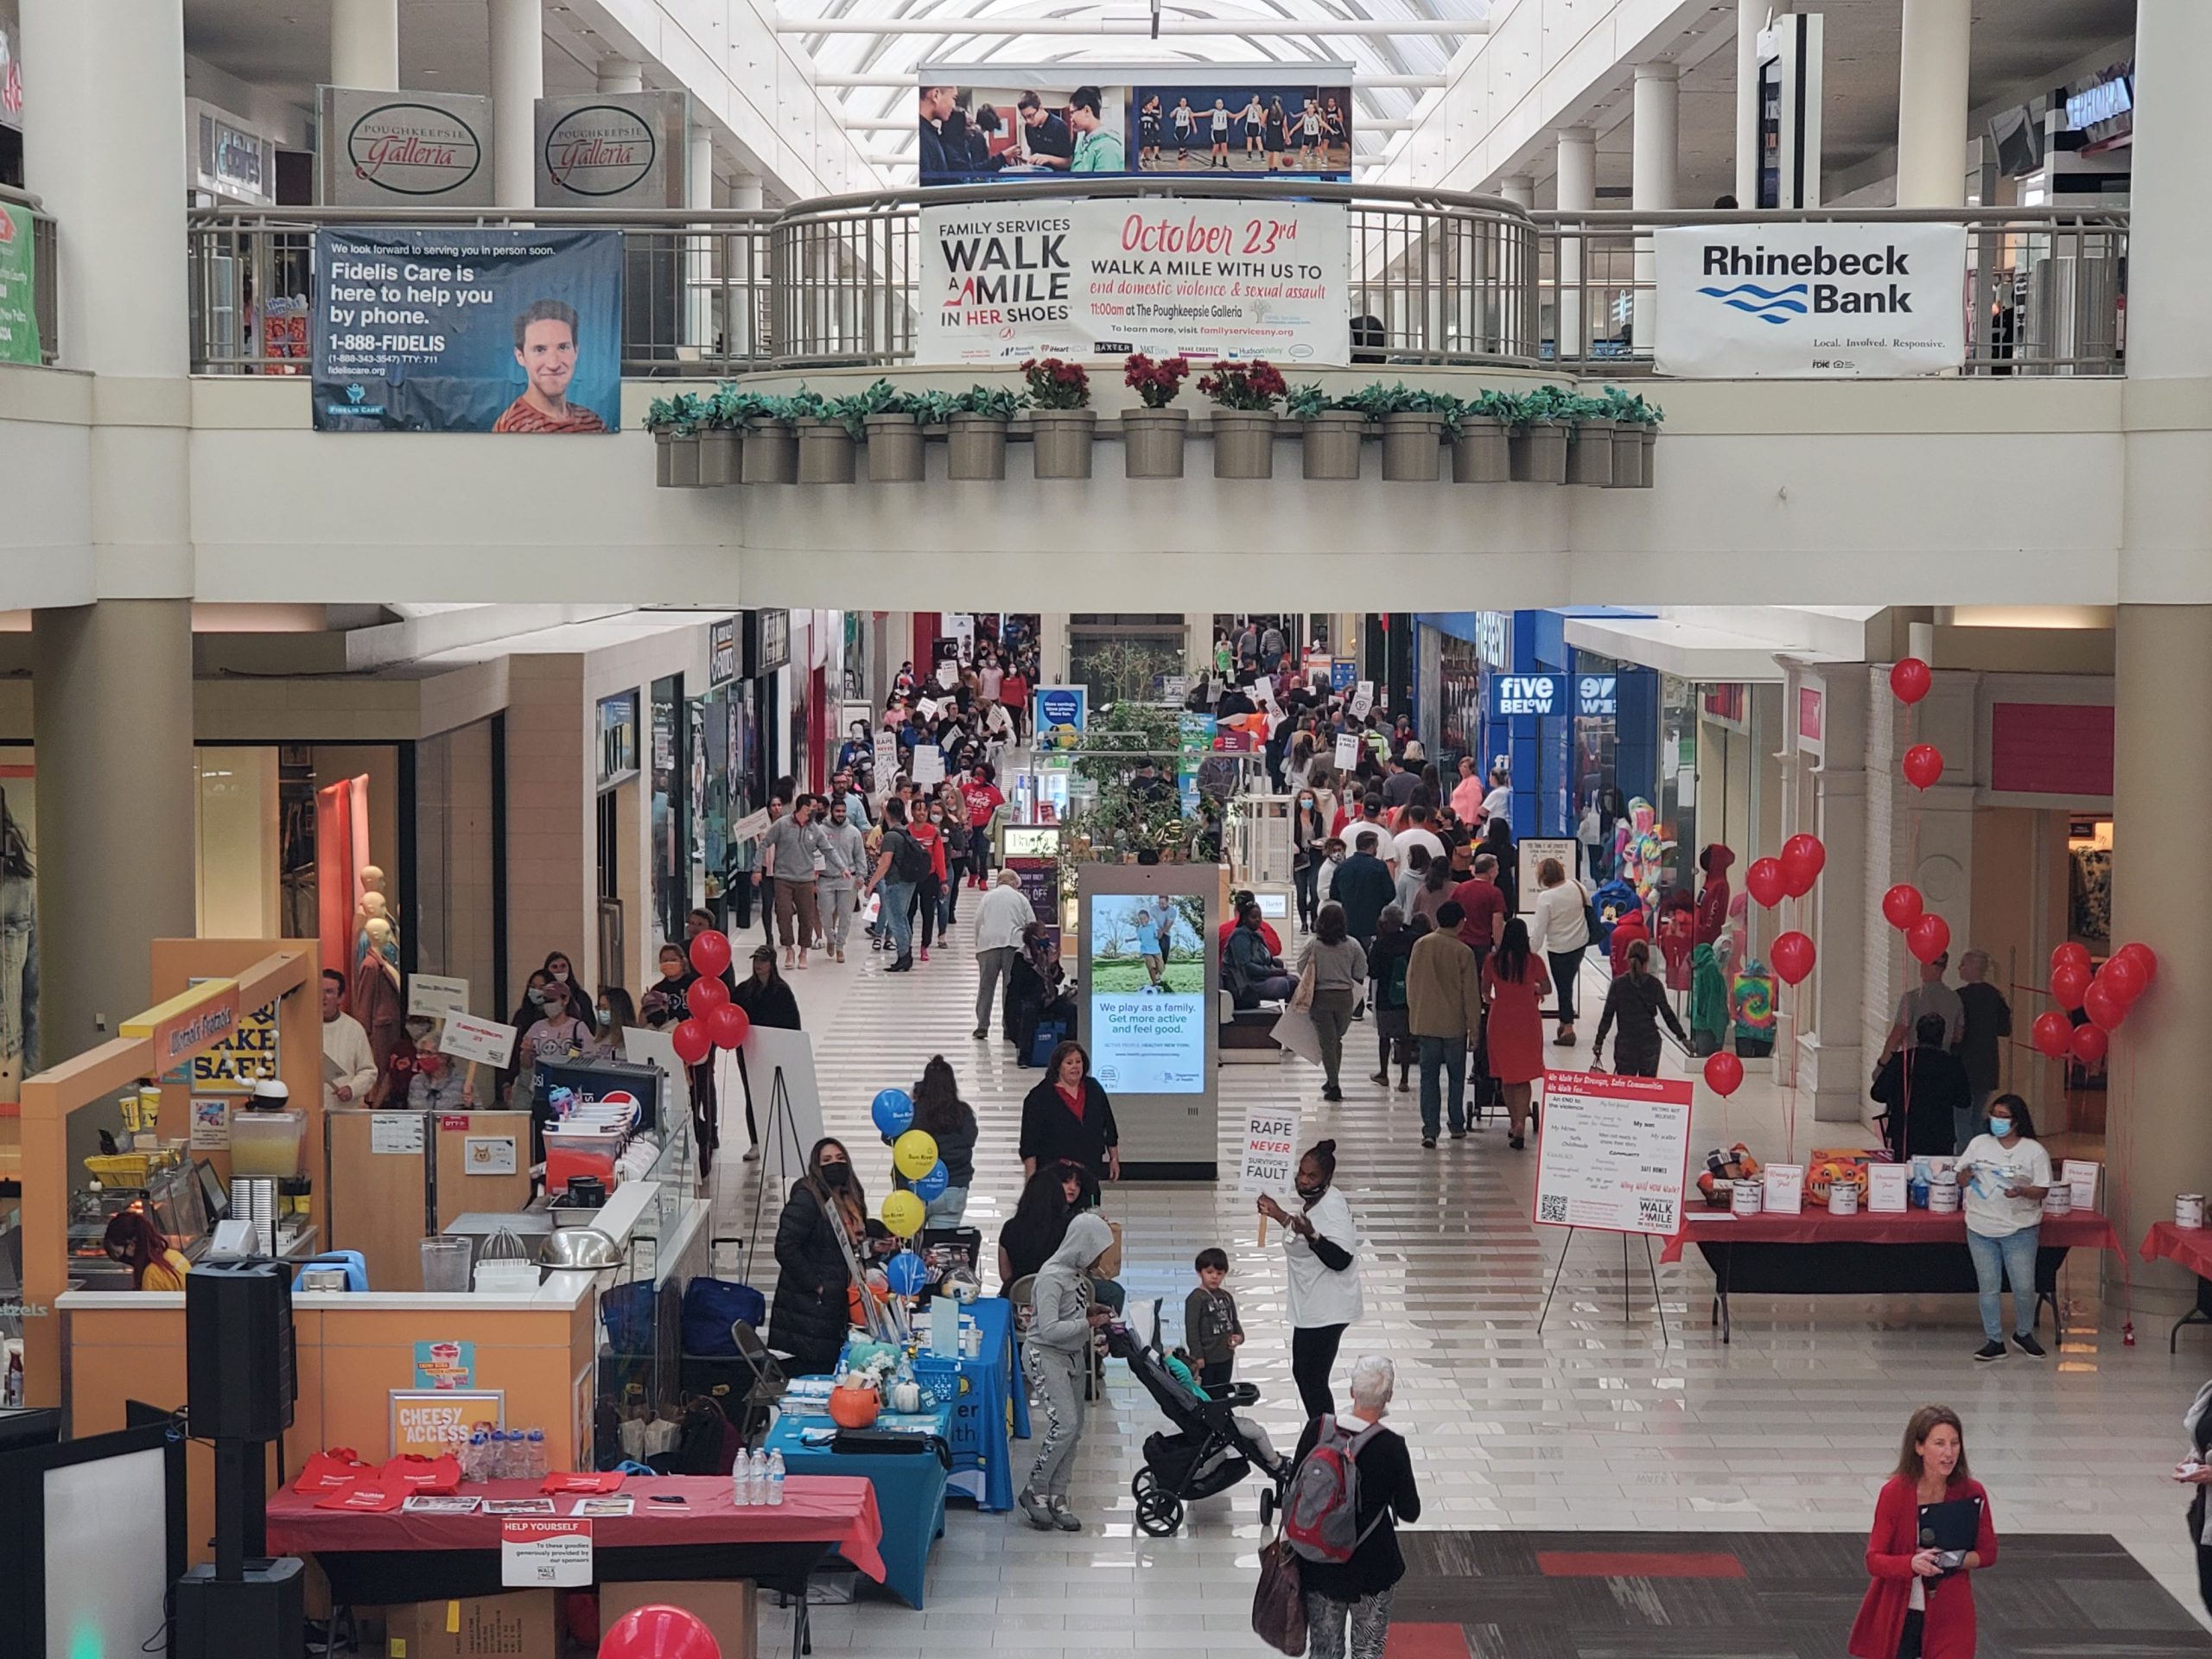 Pyramid Restructures and Extends Loan on Poughkeepsie Galleria - Pyramid  Management Group